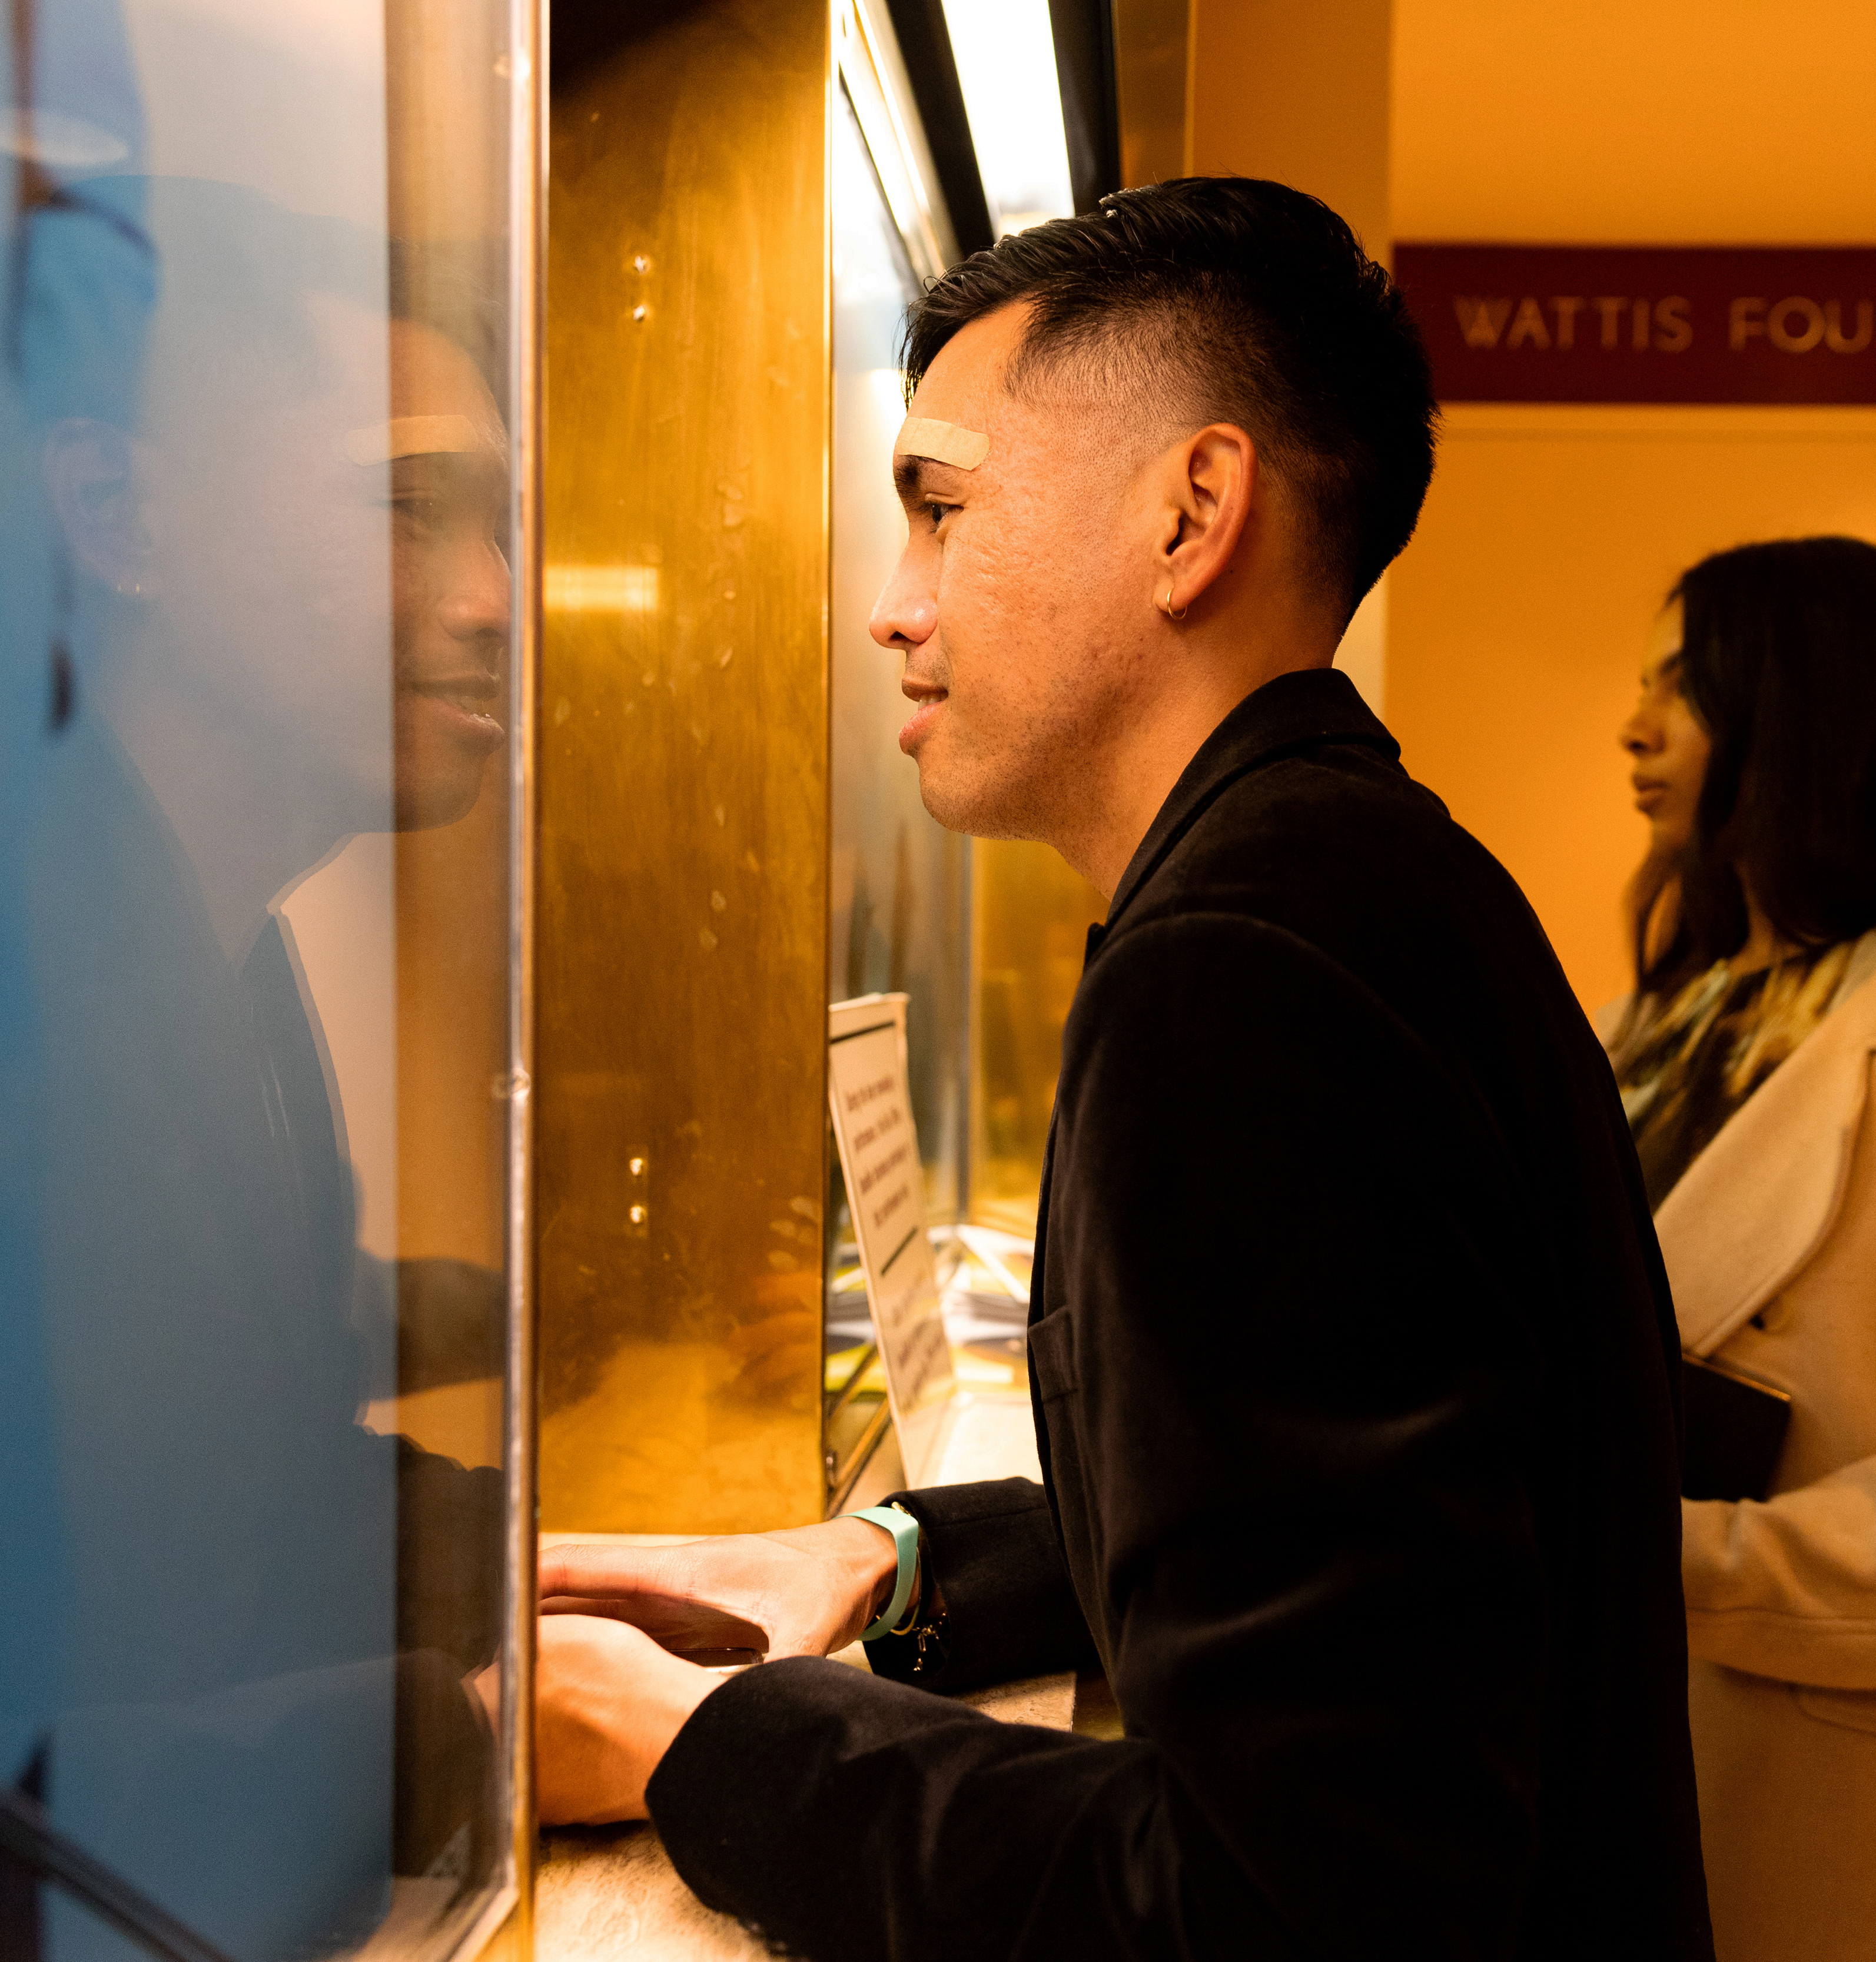 A man in a black jacket peers into a display case with interest, a woman visible behind him.